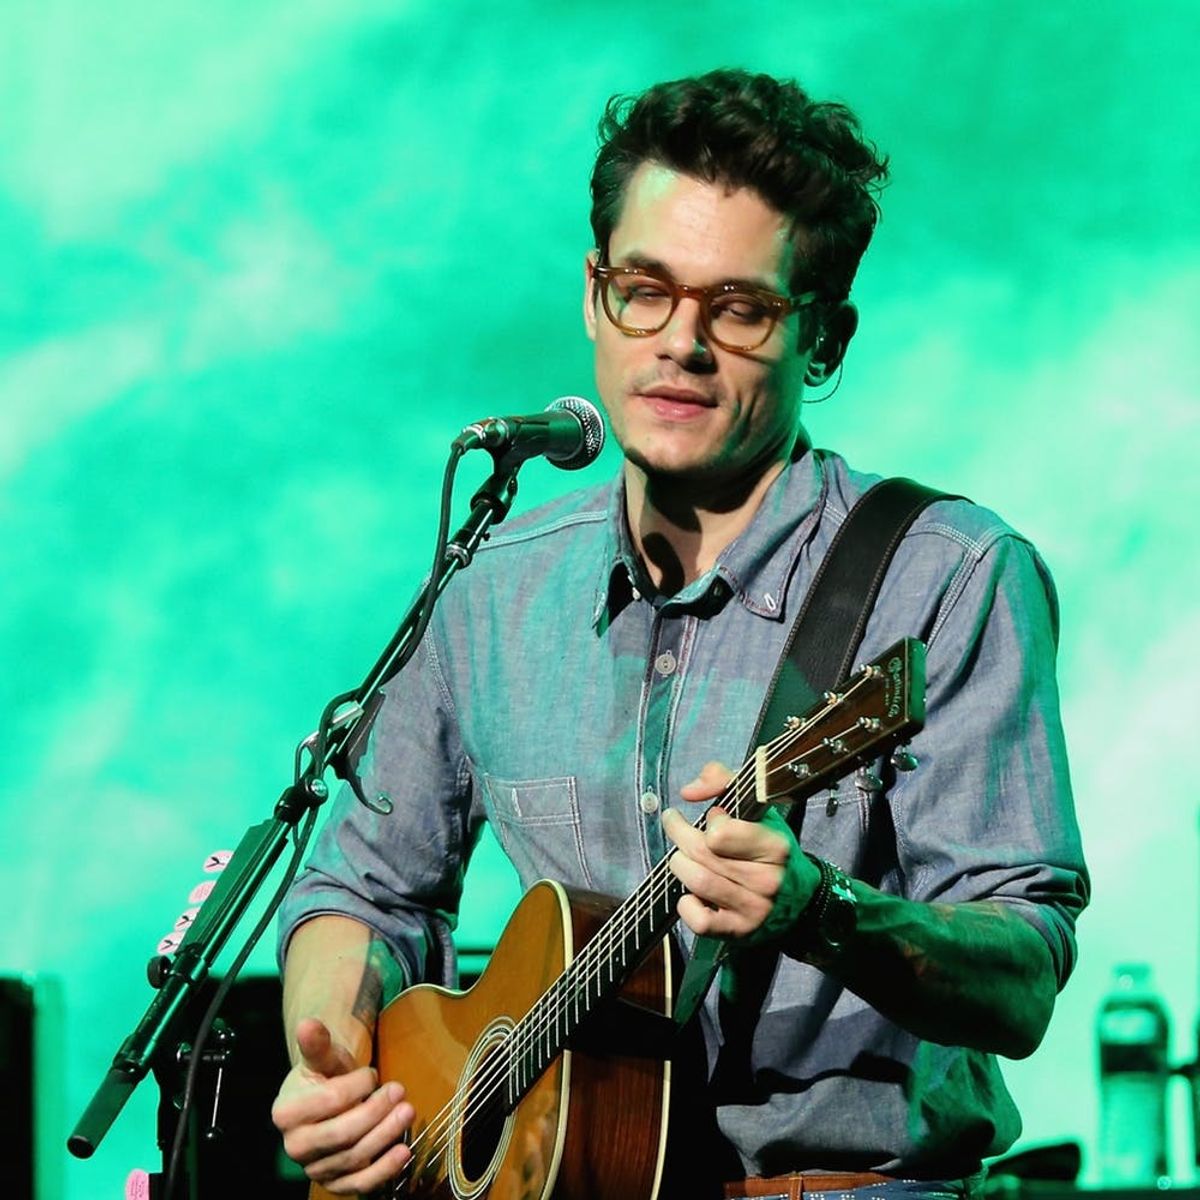 John Mayer Took His Breakup With Katy Perry Hard — Then He Wrote About It